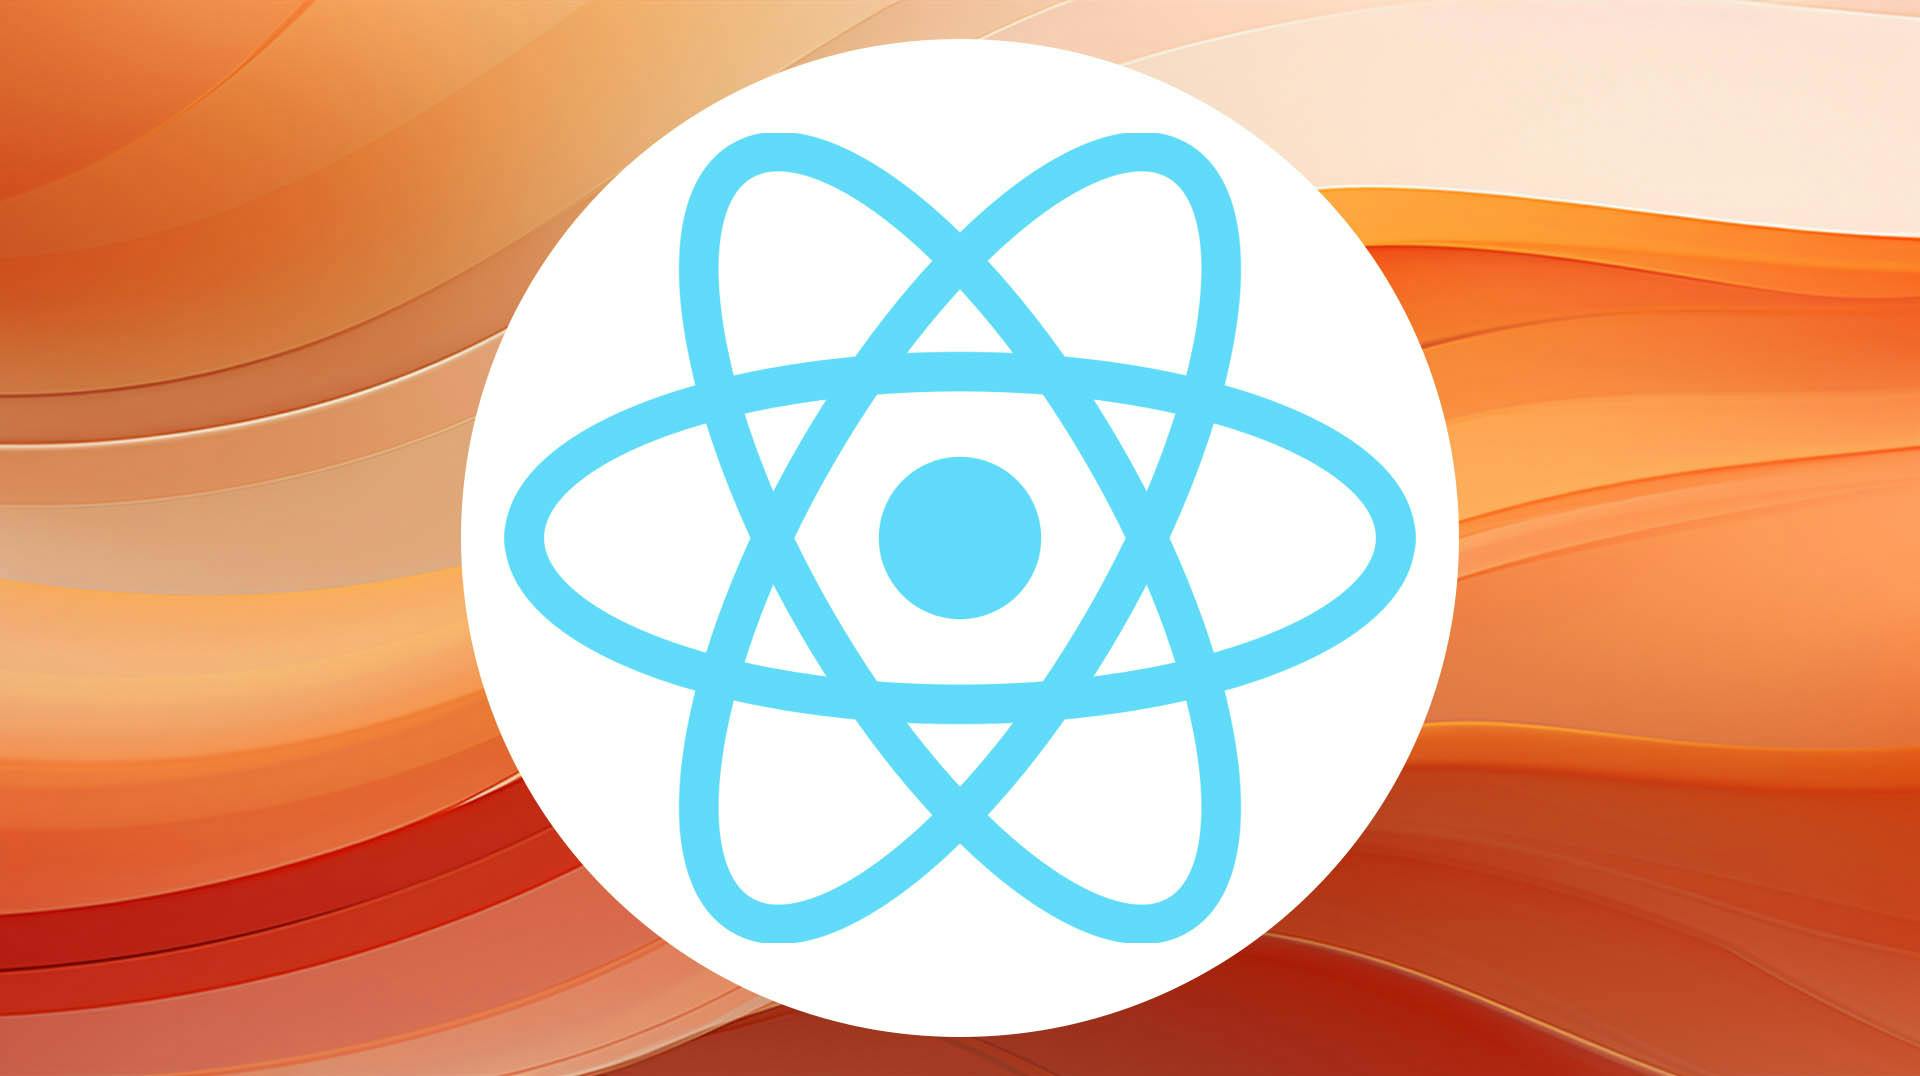 What is React? And why use it